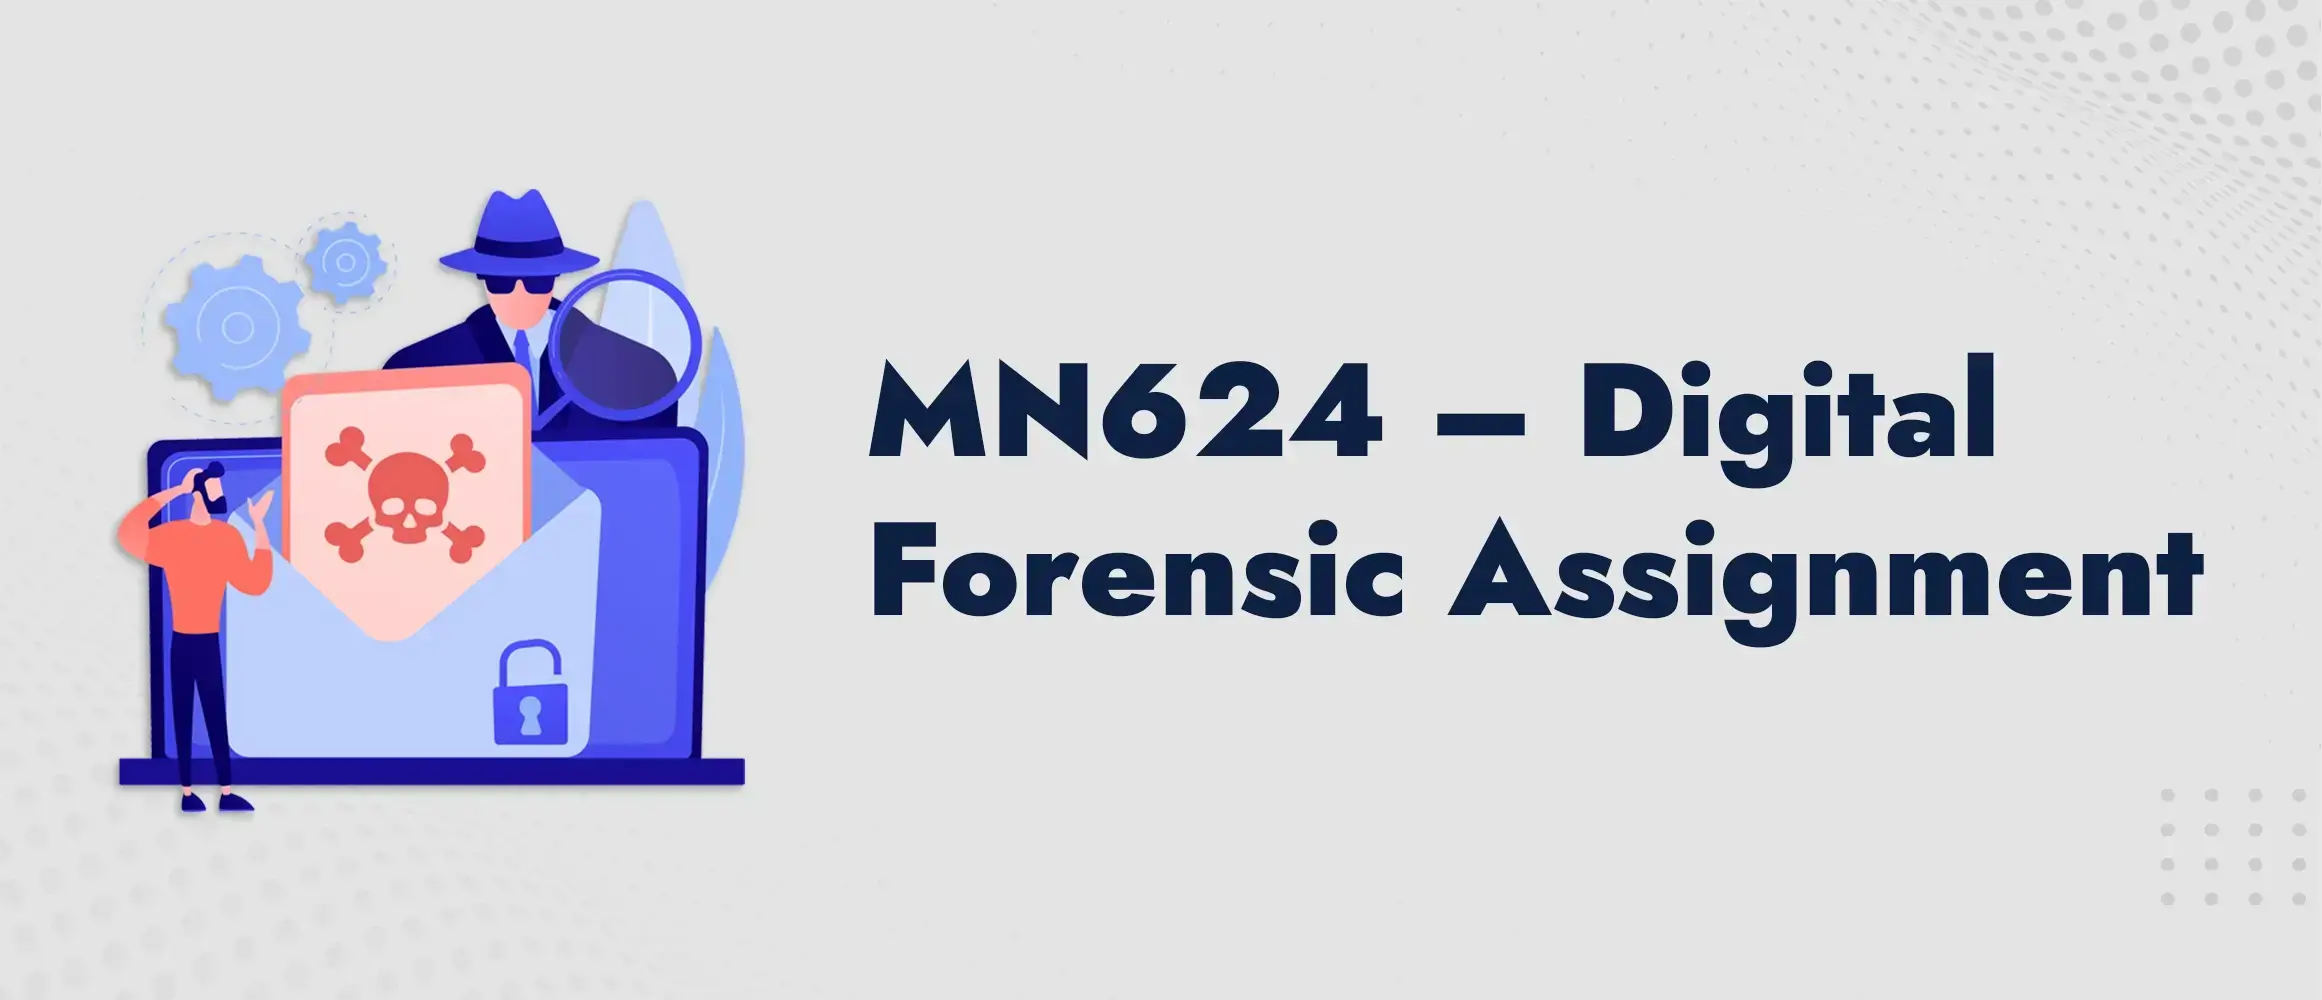 MN624 Digital Forensic Assignment